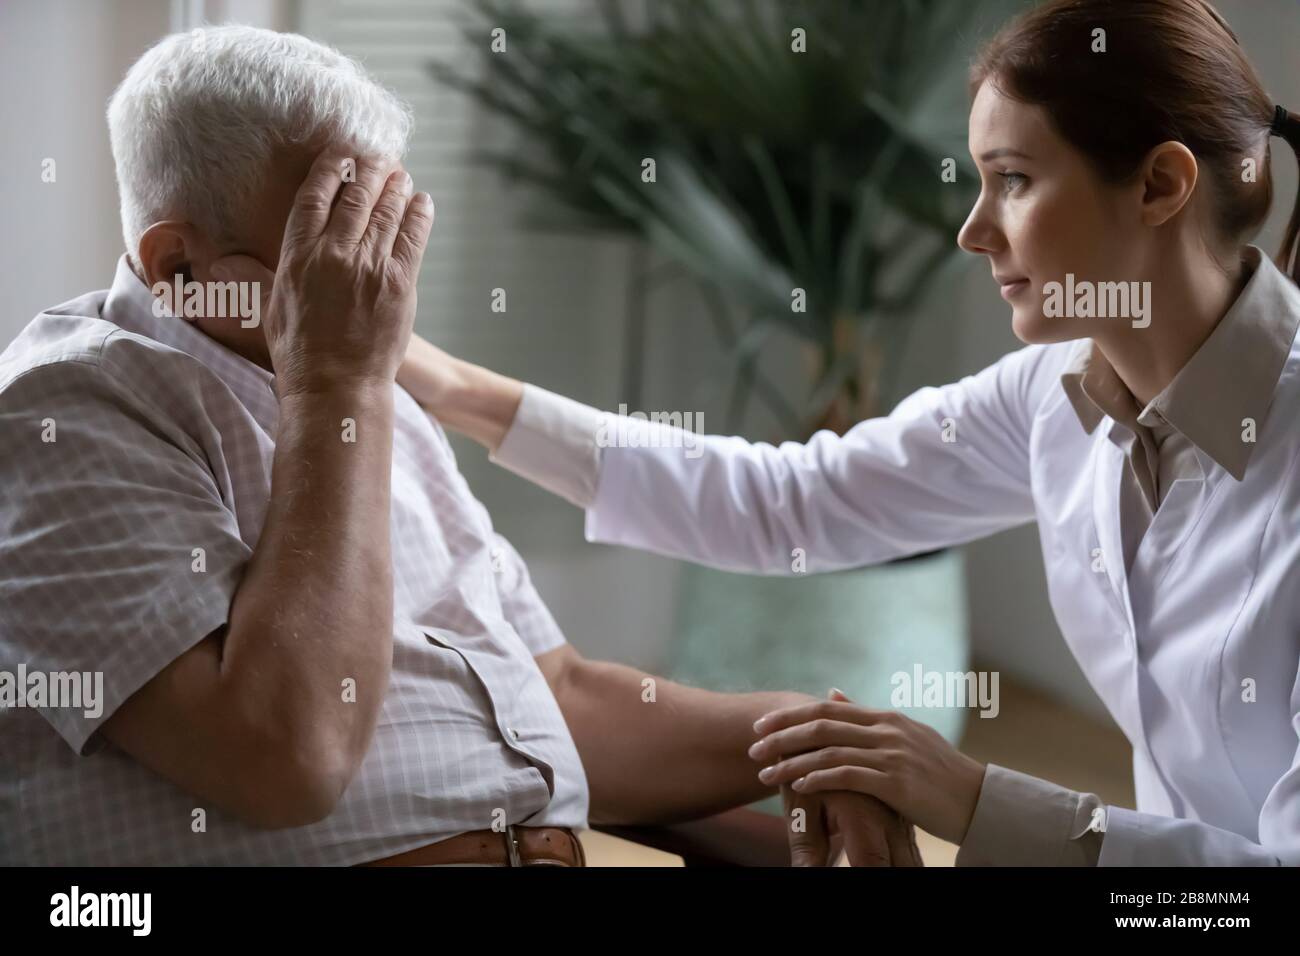 Young nurse caring about 80s patient provide support relieves loneliness Stock Photo